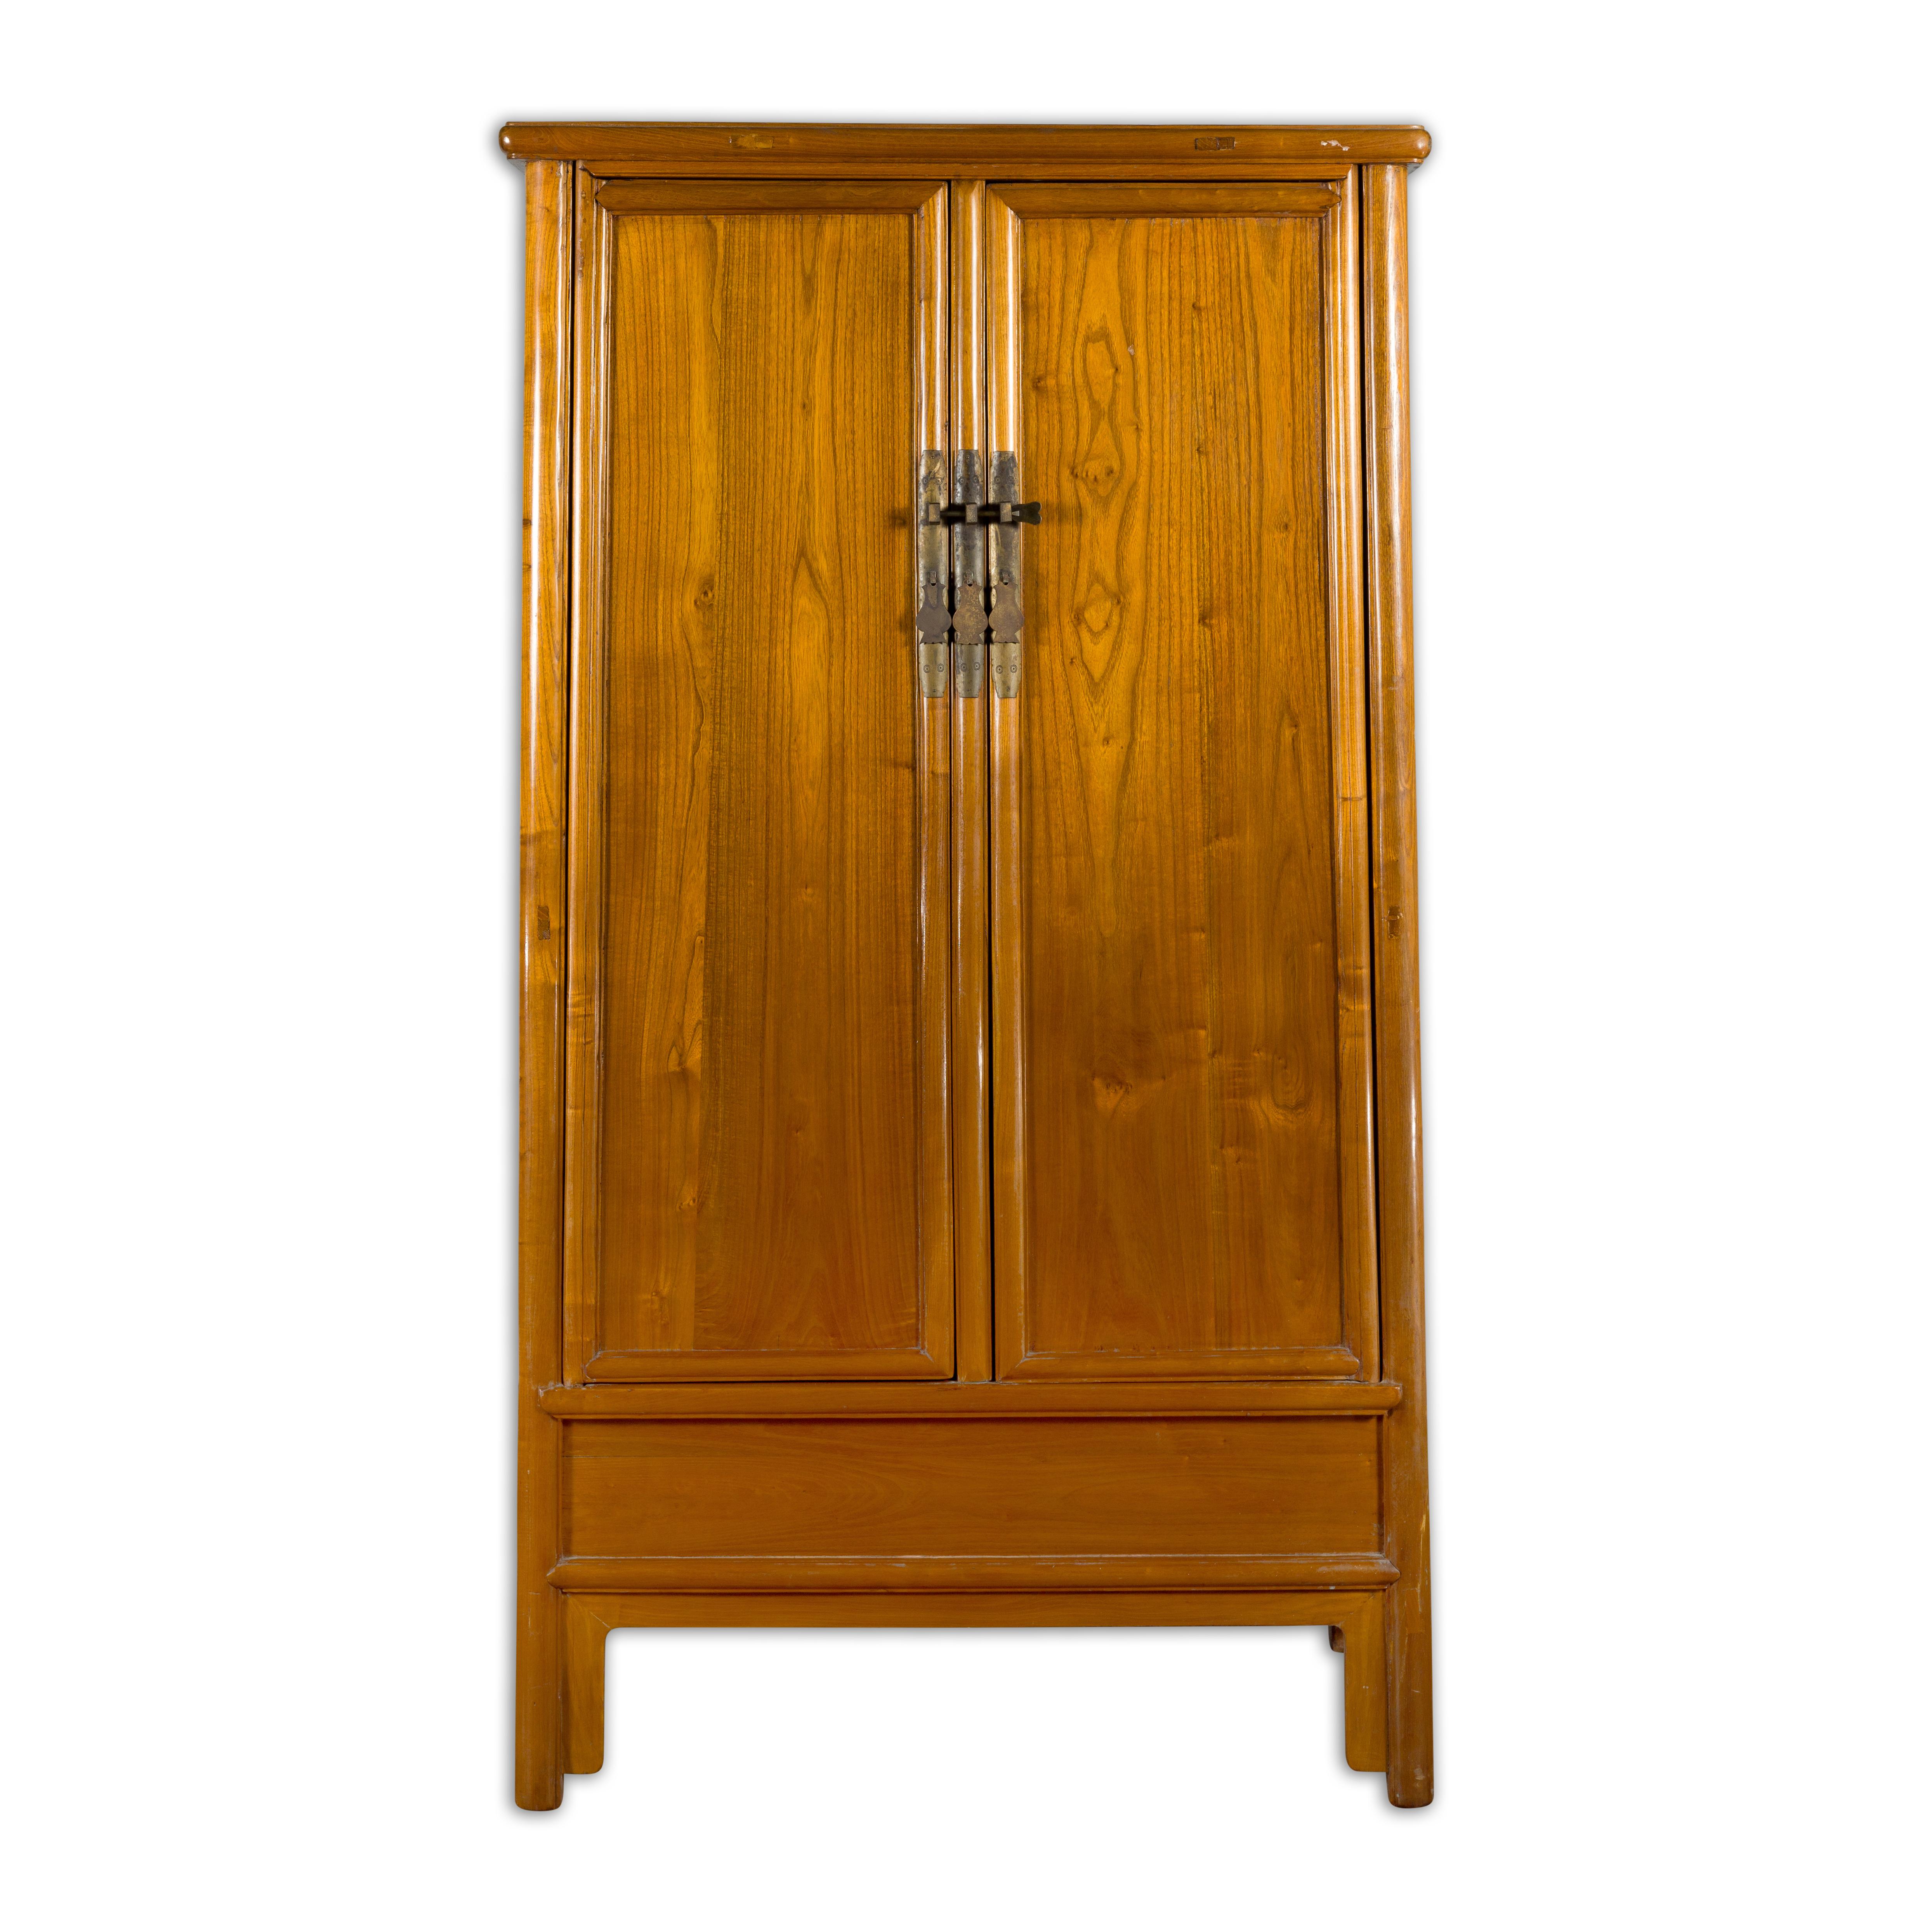 Chinese Qing Dynasty 19th Century Elmwood Noodle Cabinet with Hidden Drawers For Sale 10